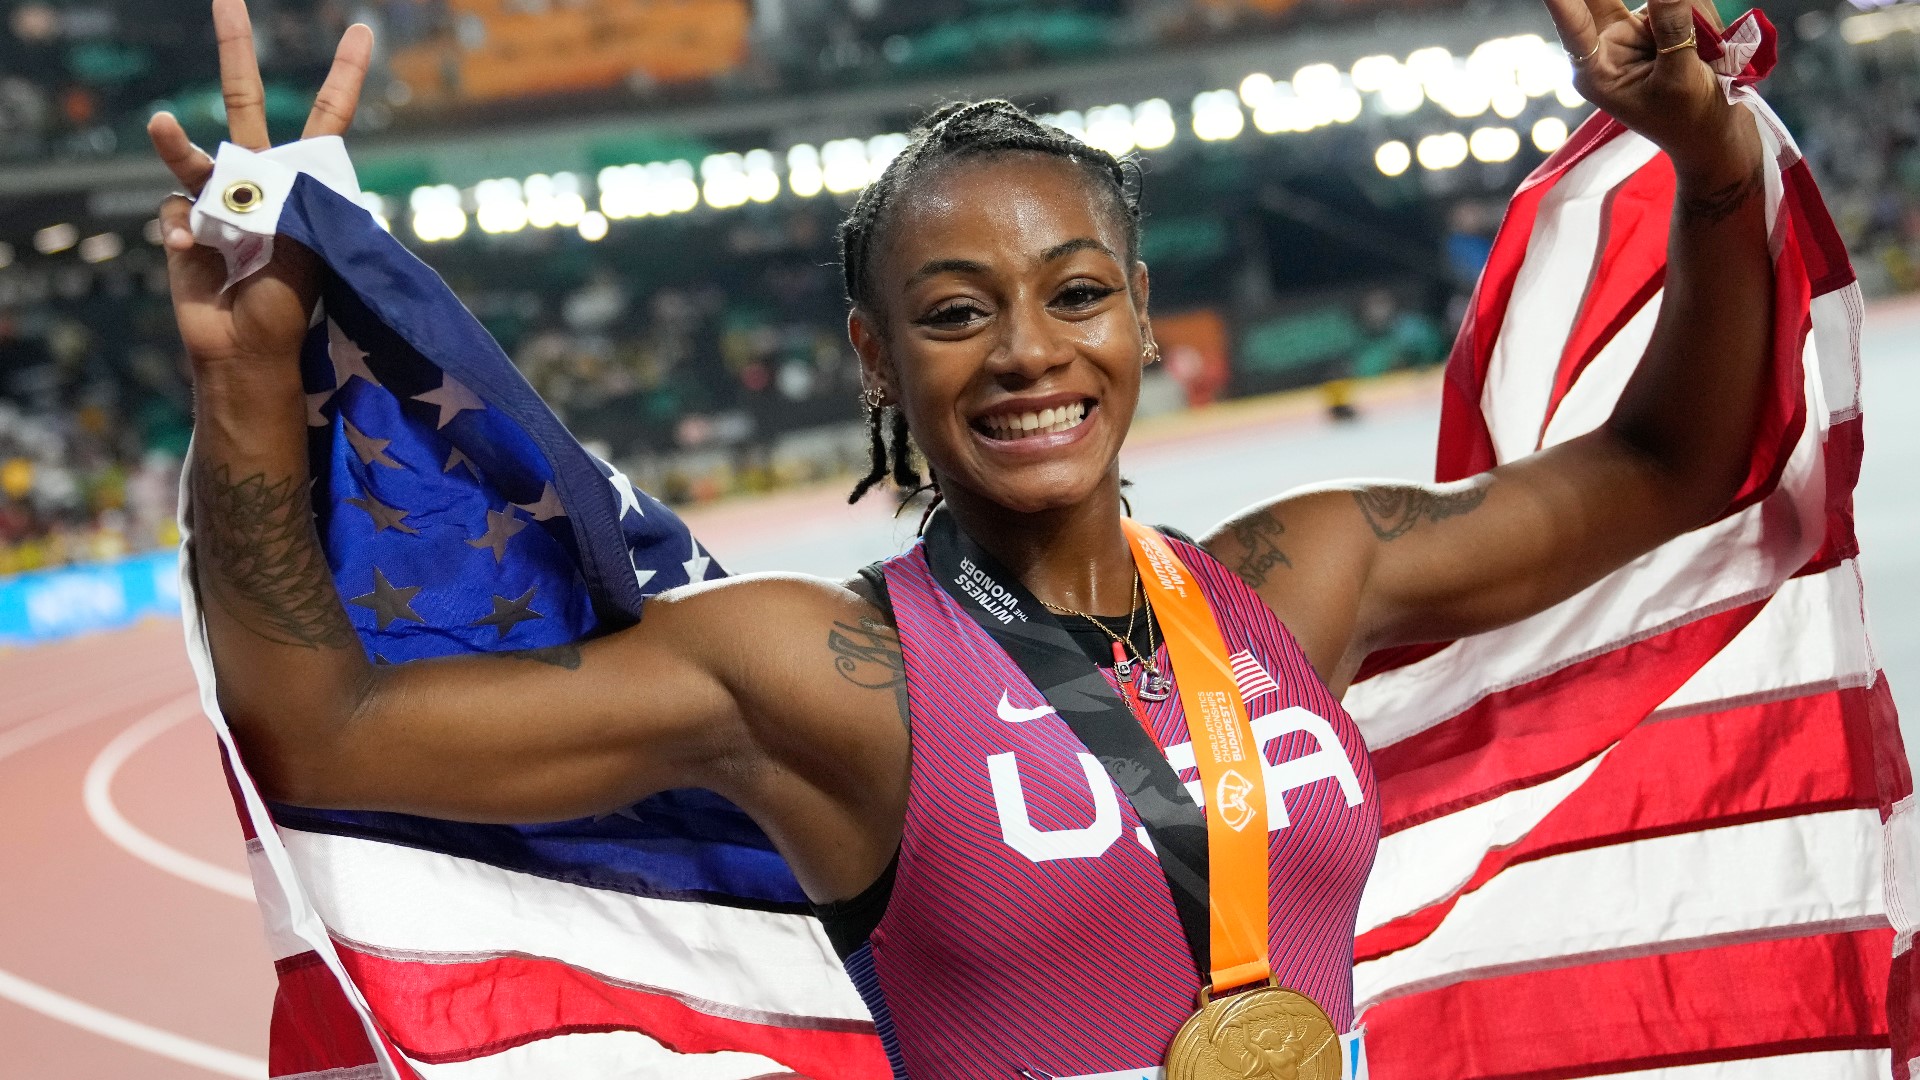 The sprinter who won the 100-meter world championship got her start at Dallas ISD’s Carter High School.